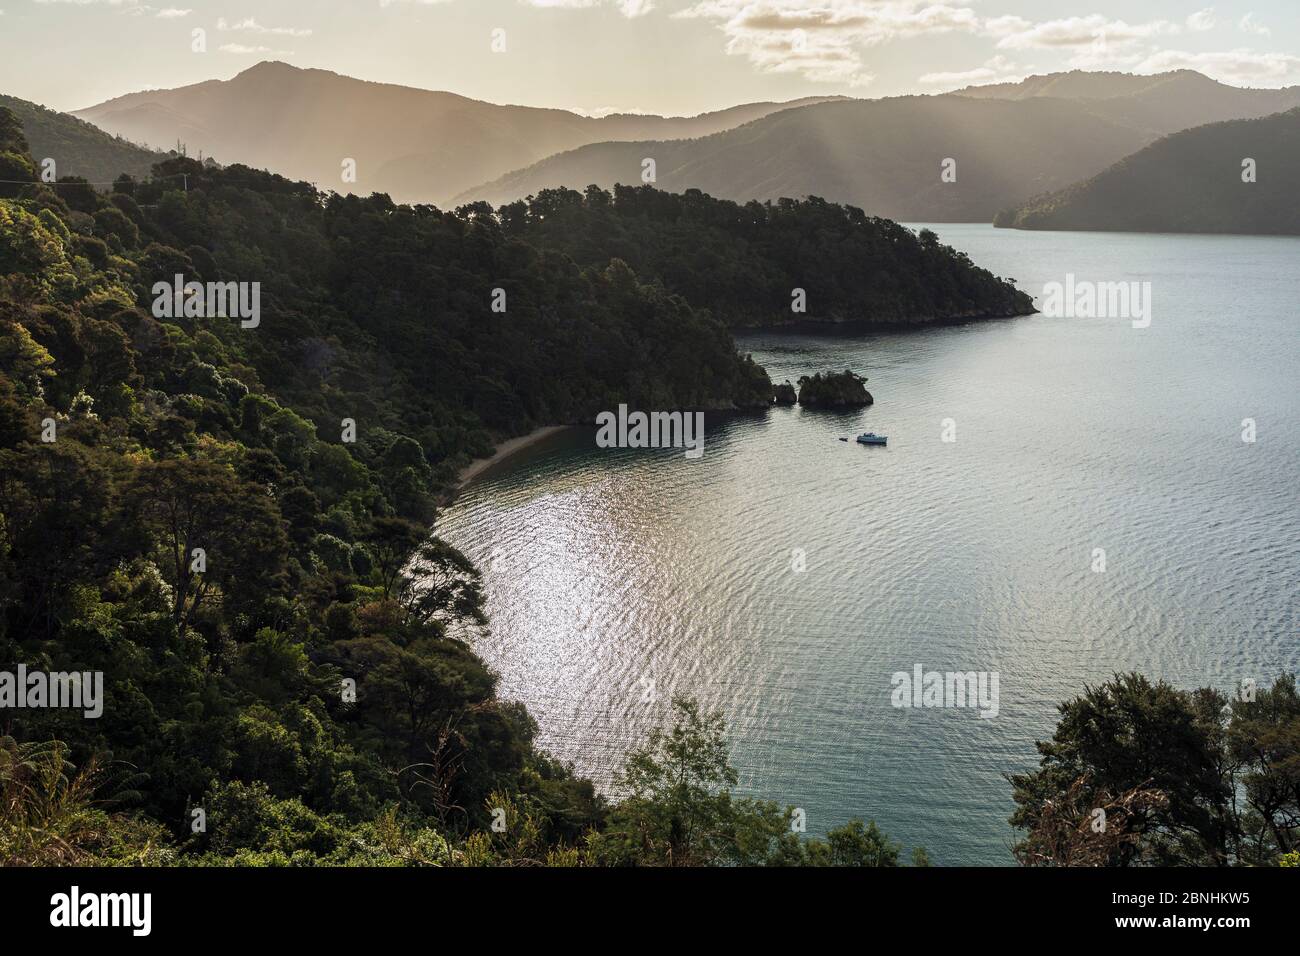 Sun setting over Governors Bay, Marlborough Sounds, South Island, New Zealand Stock Photo